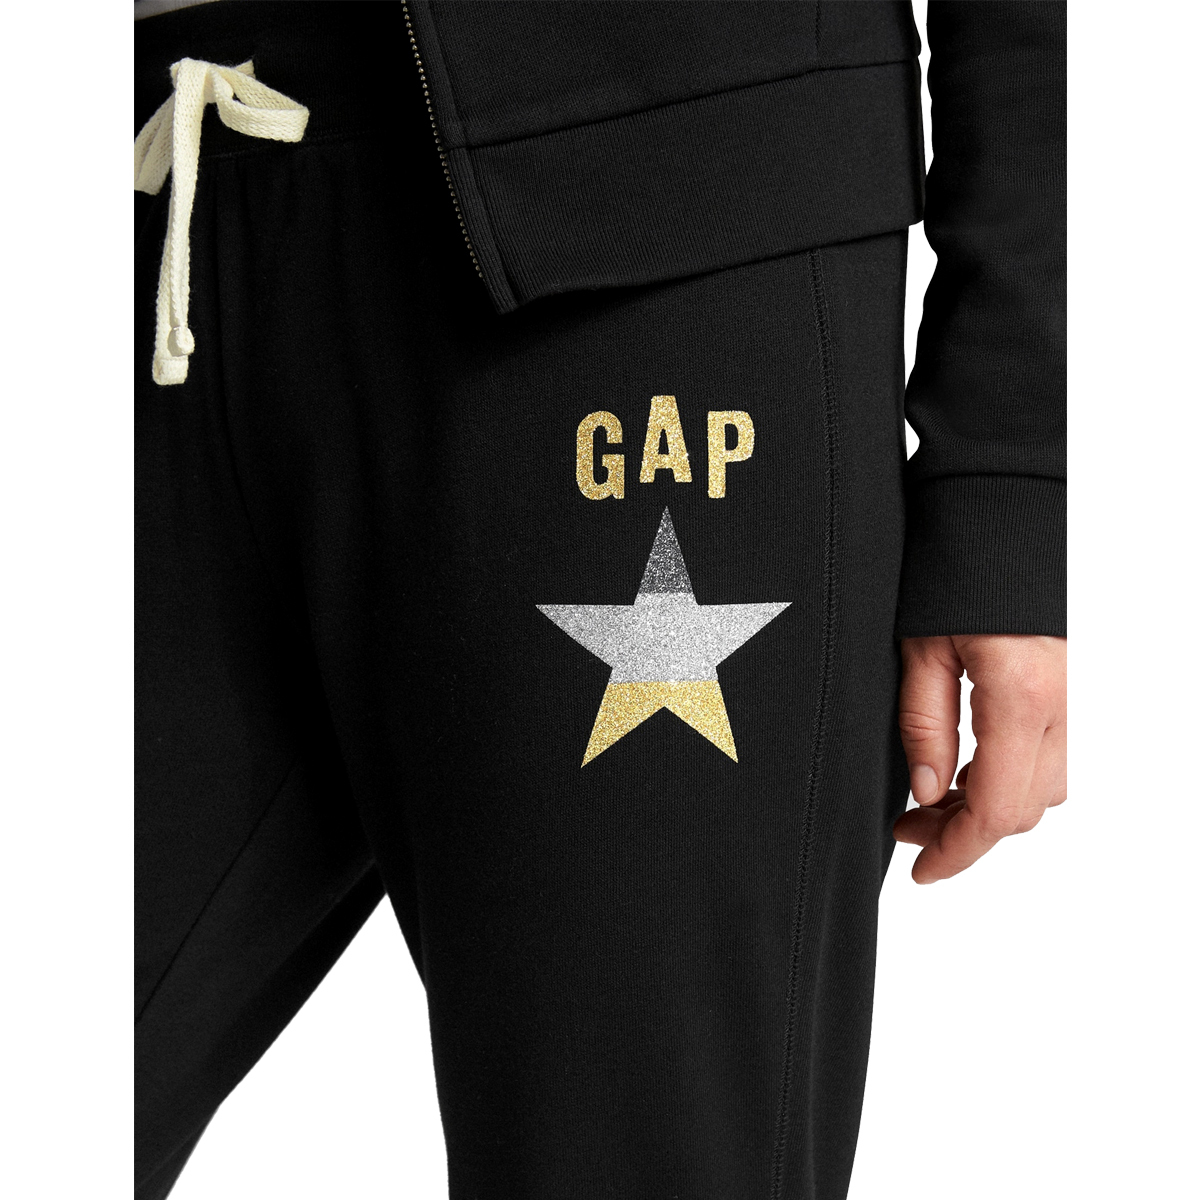 Gap Soft Fleece Knitted Solid Color Jogger with Metallic Glitter Logo  - Black